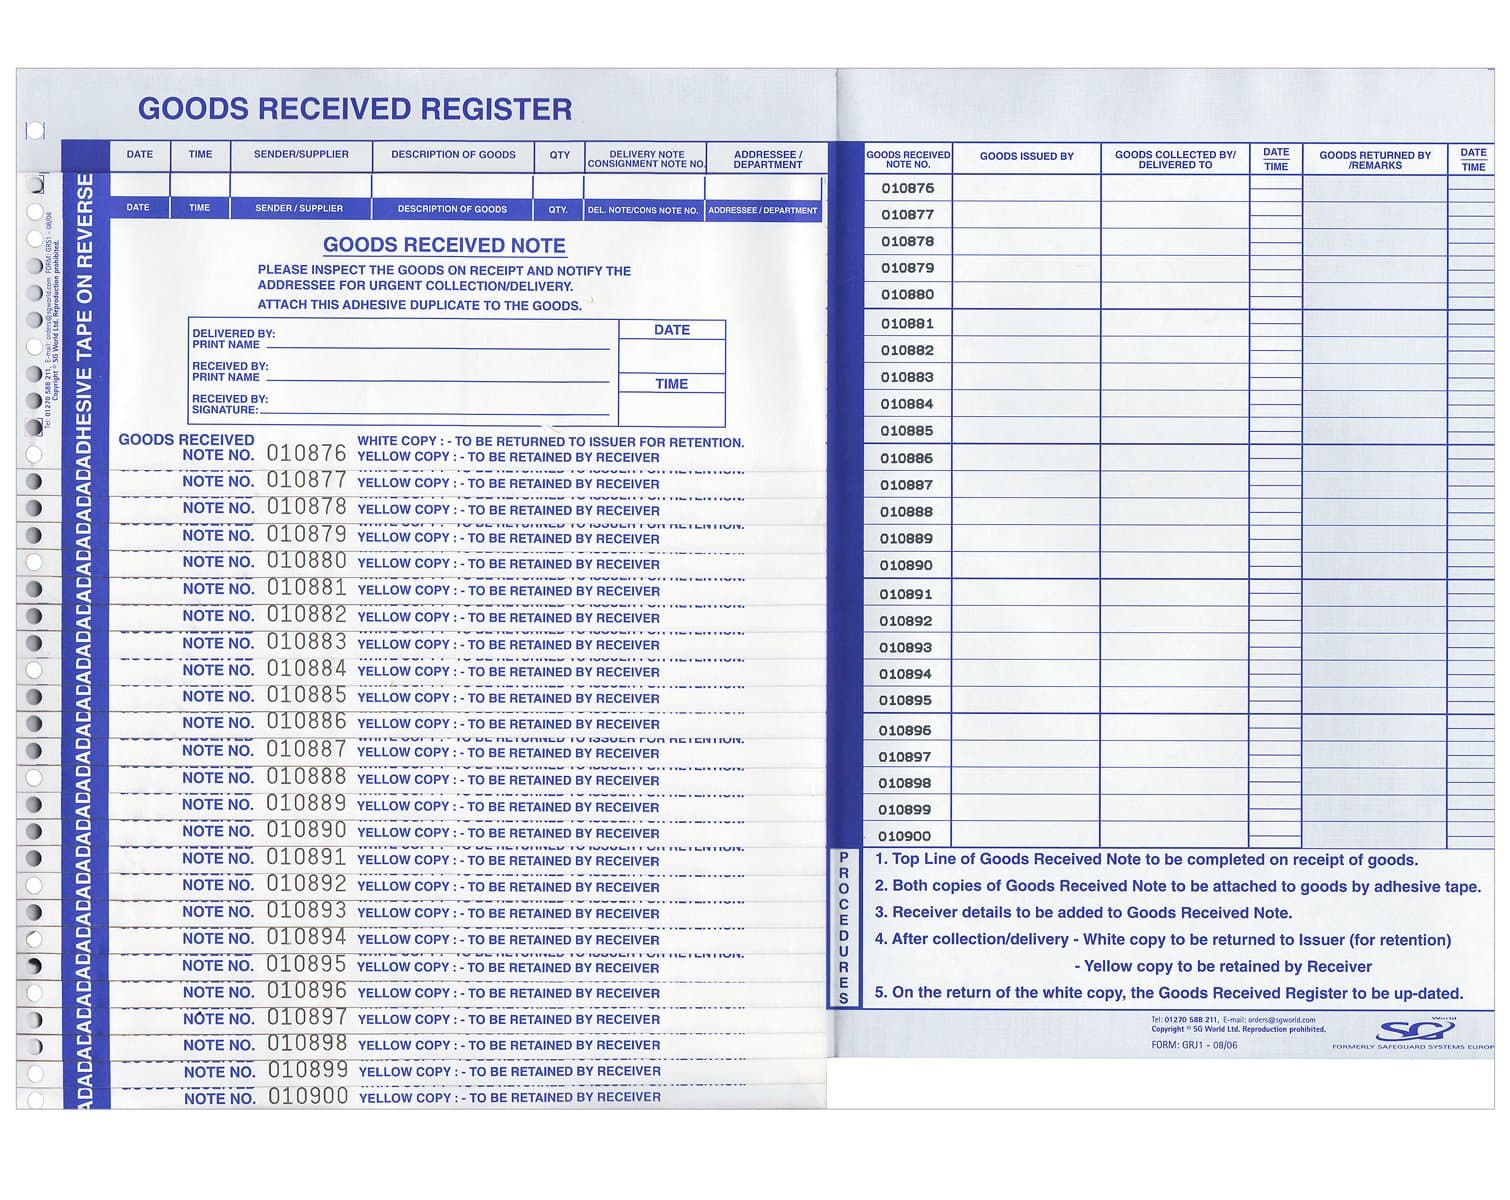 Goods Received Register with slips